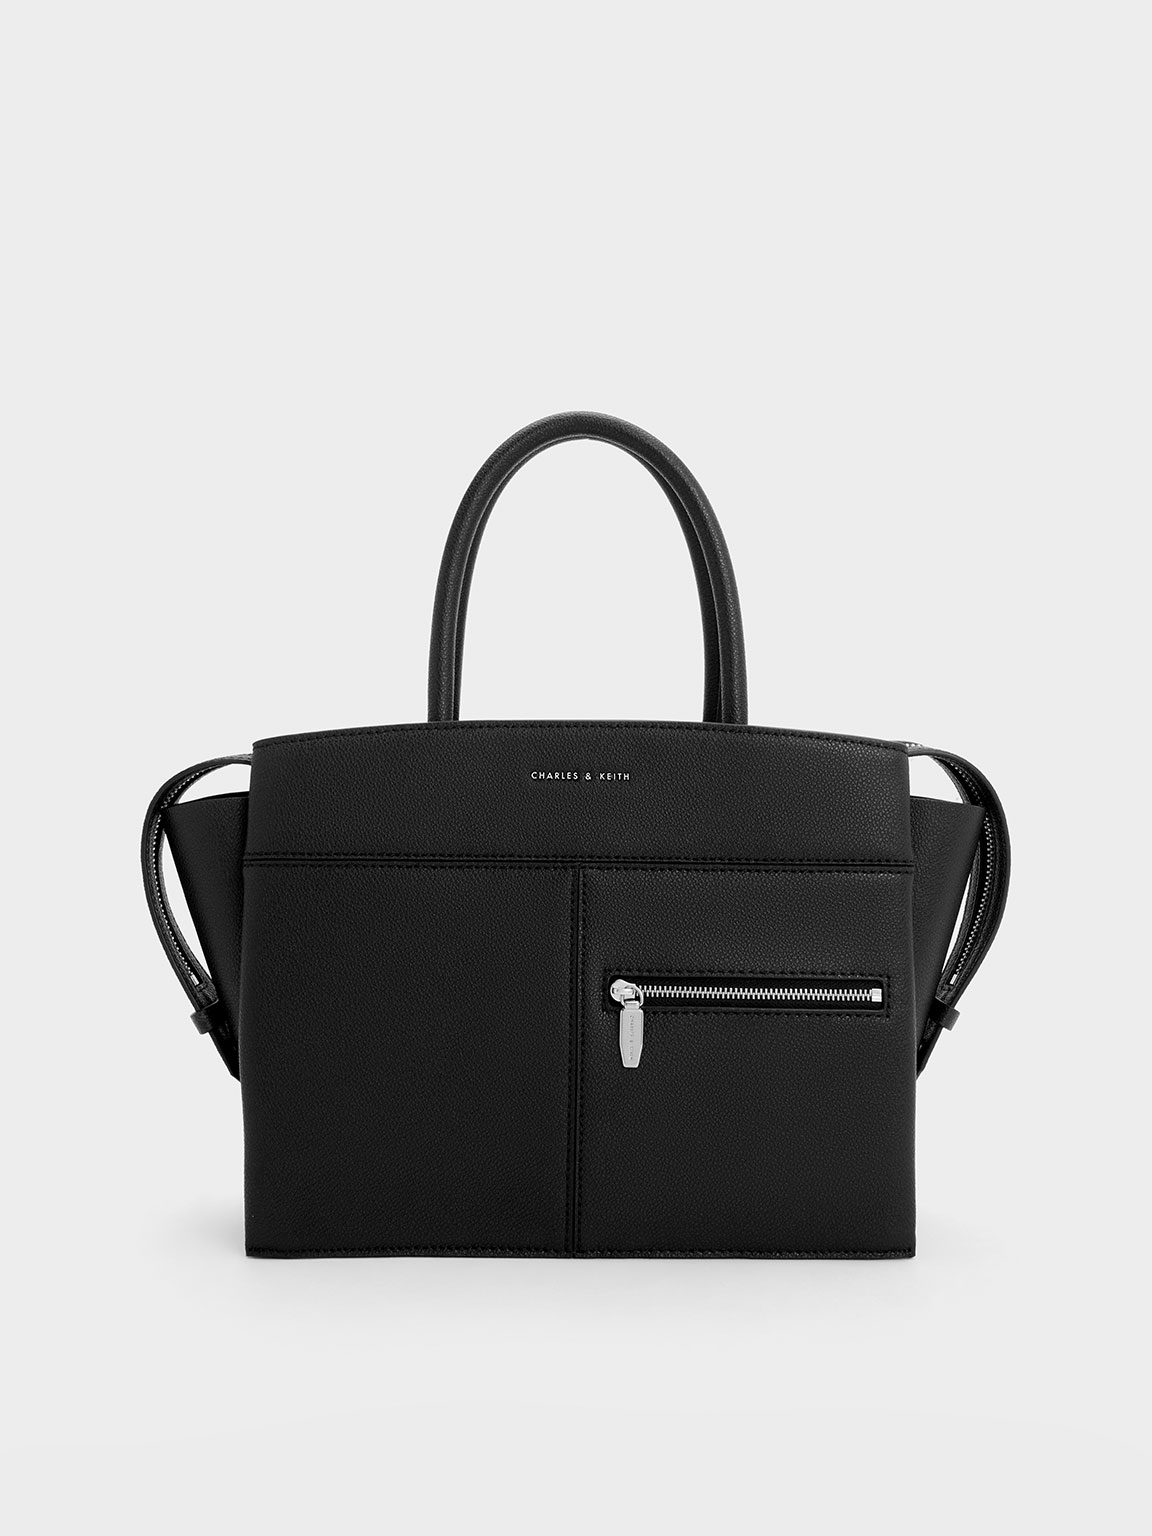 Charles & Keith Anwen Trapeze Top Handle Bag In Black